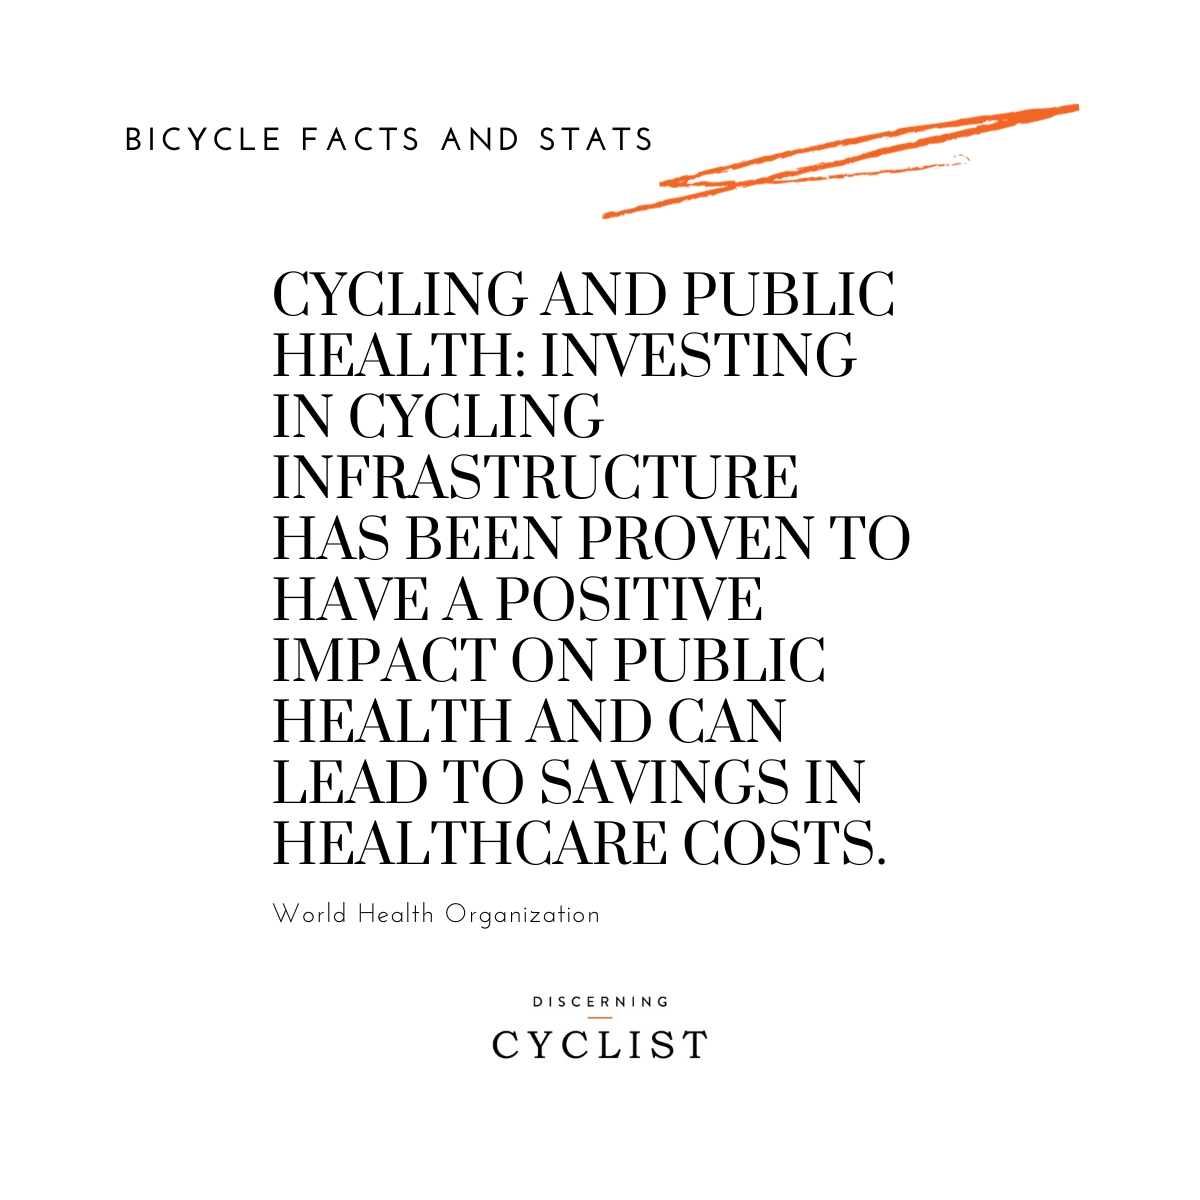 Cycling and Public Health: Investing in cycling infrastructure has been proven to have a positive impact on public health and can lead to savings in healthcare costs.